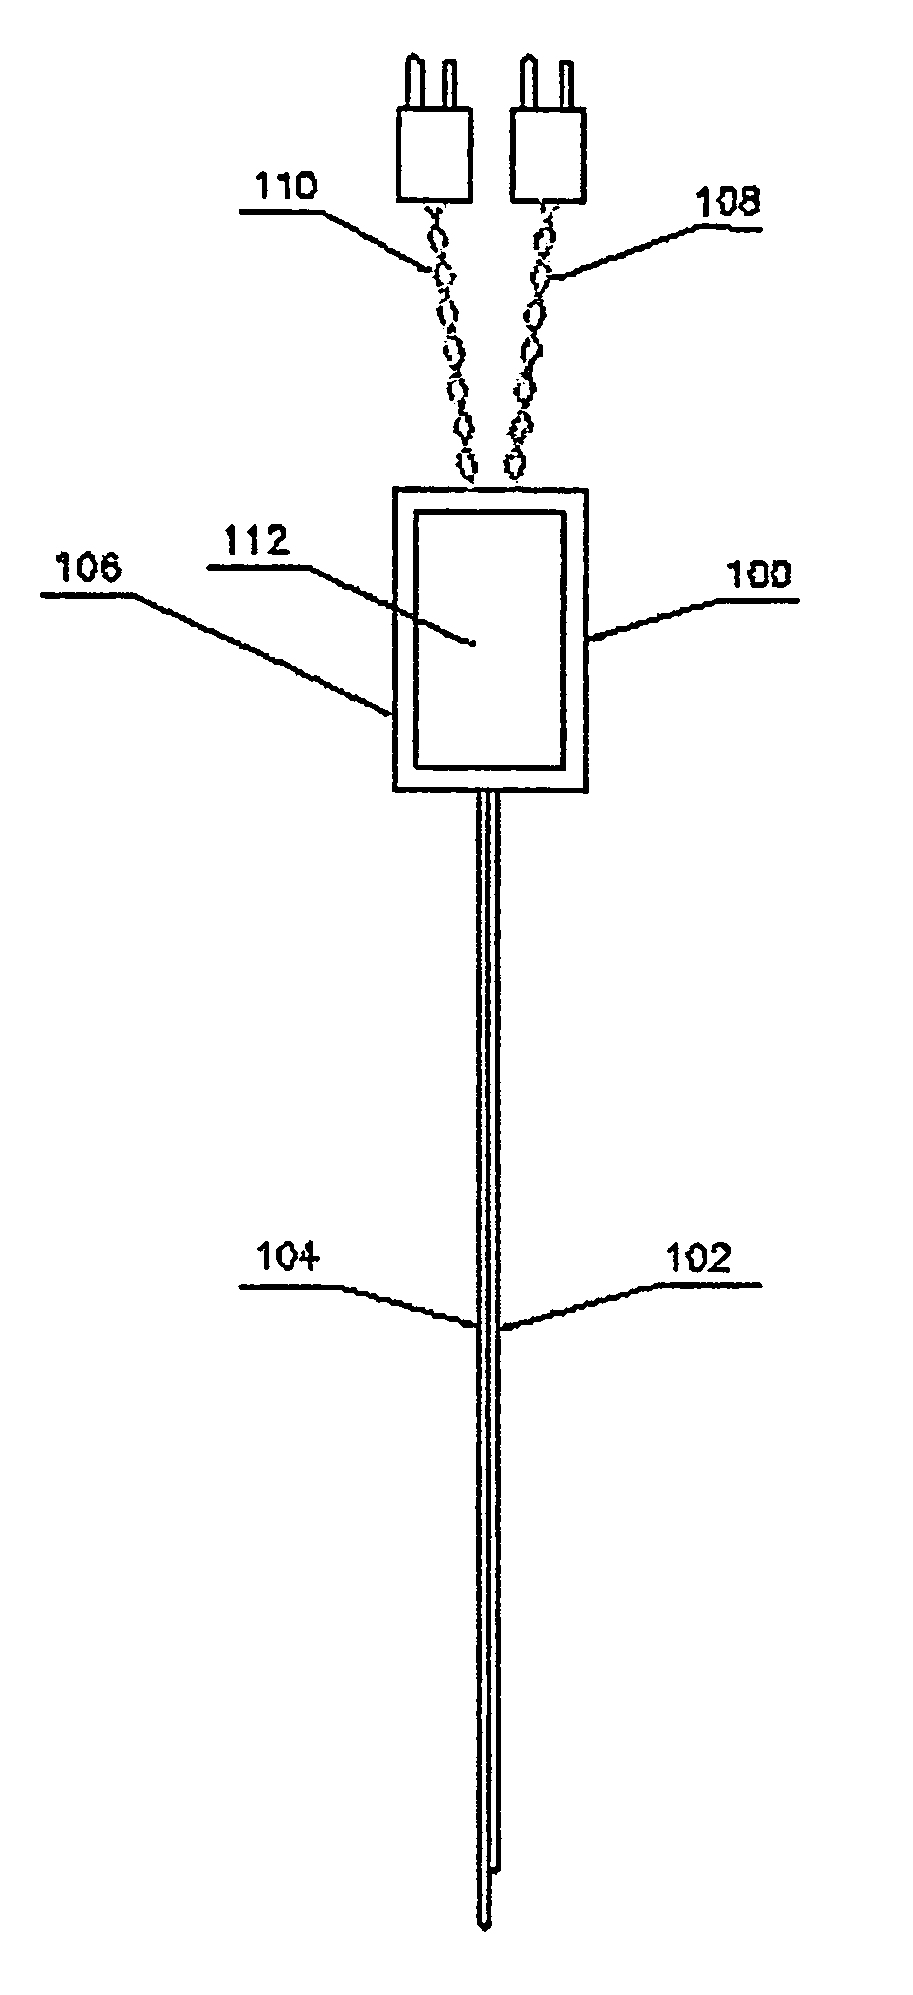 Method and a device for thermal analysis of cast iron